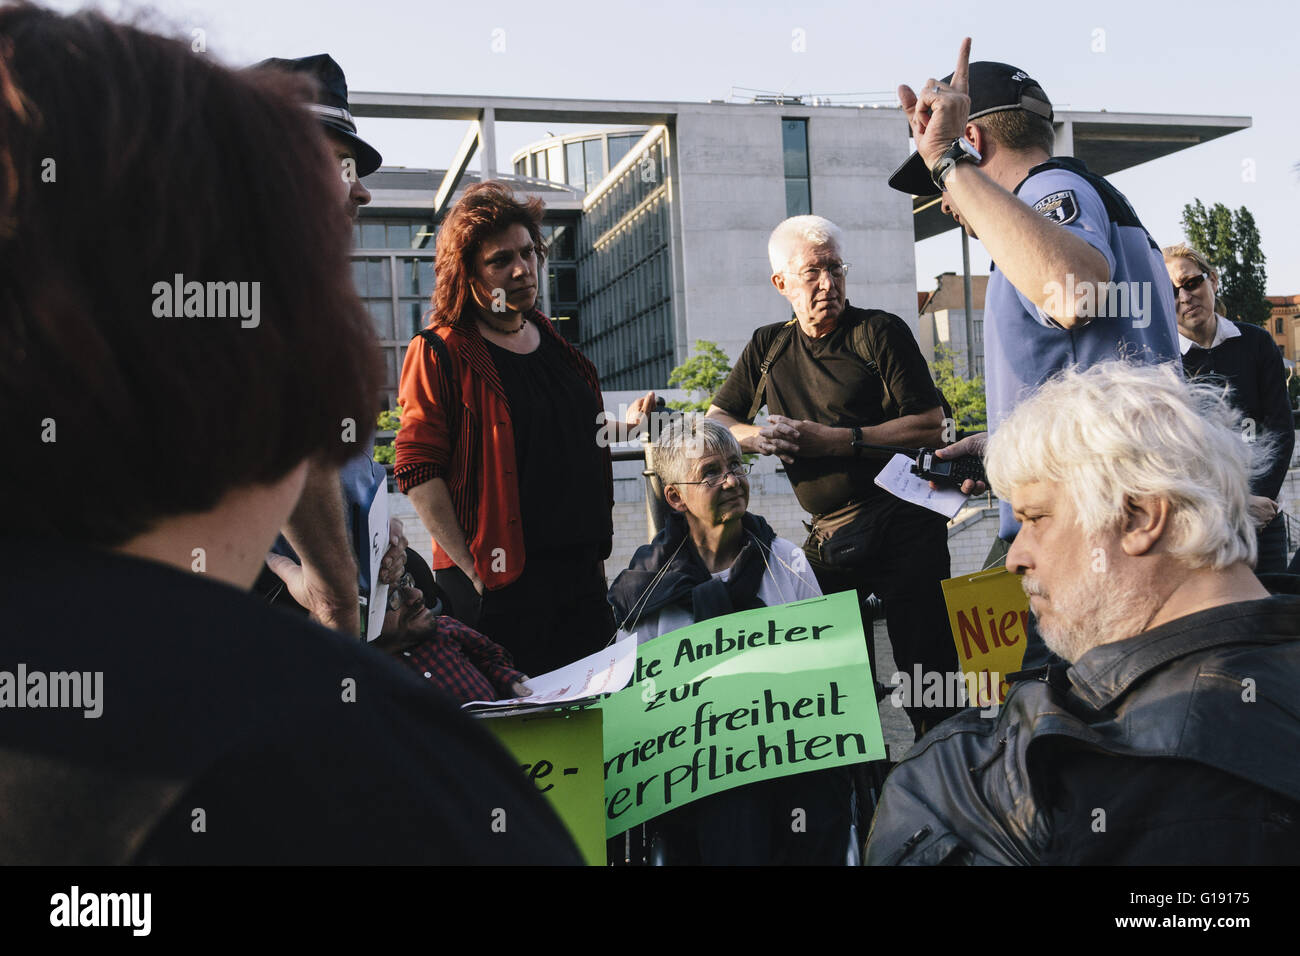 Berlin, Berlin, Germany. 11th May, 2016. Disability rights activists have chained themselves to a railing in Berlin's government district. The protesters ask for a full implementation of the Disability Rights Convention of the United Nations as part of the promised federal participation law and support for assistance and domestic care regardless of income. © Jan Scheunert/ZUMA Wire/Alamy Live News Stock Photo